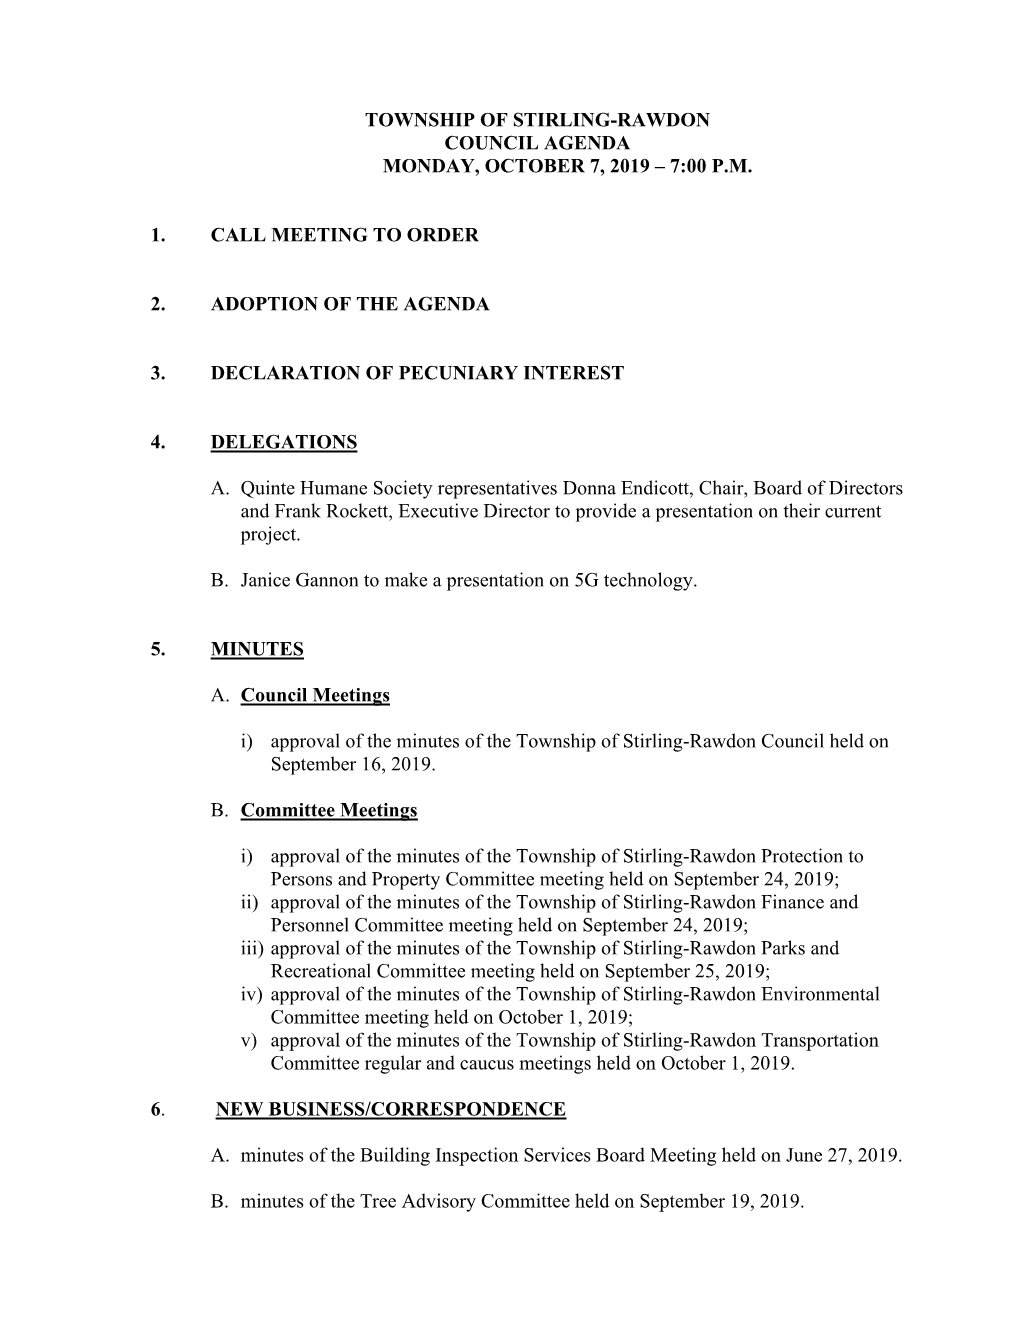 Township of Stirling-Rawdon Council Agenda Monday, October 7, 2019 – 7:00 P.M